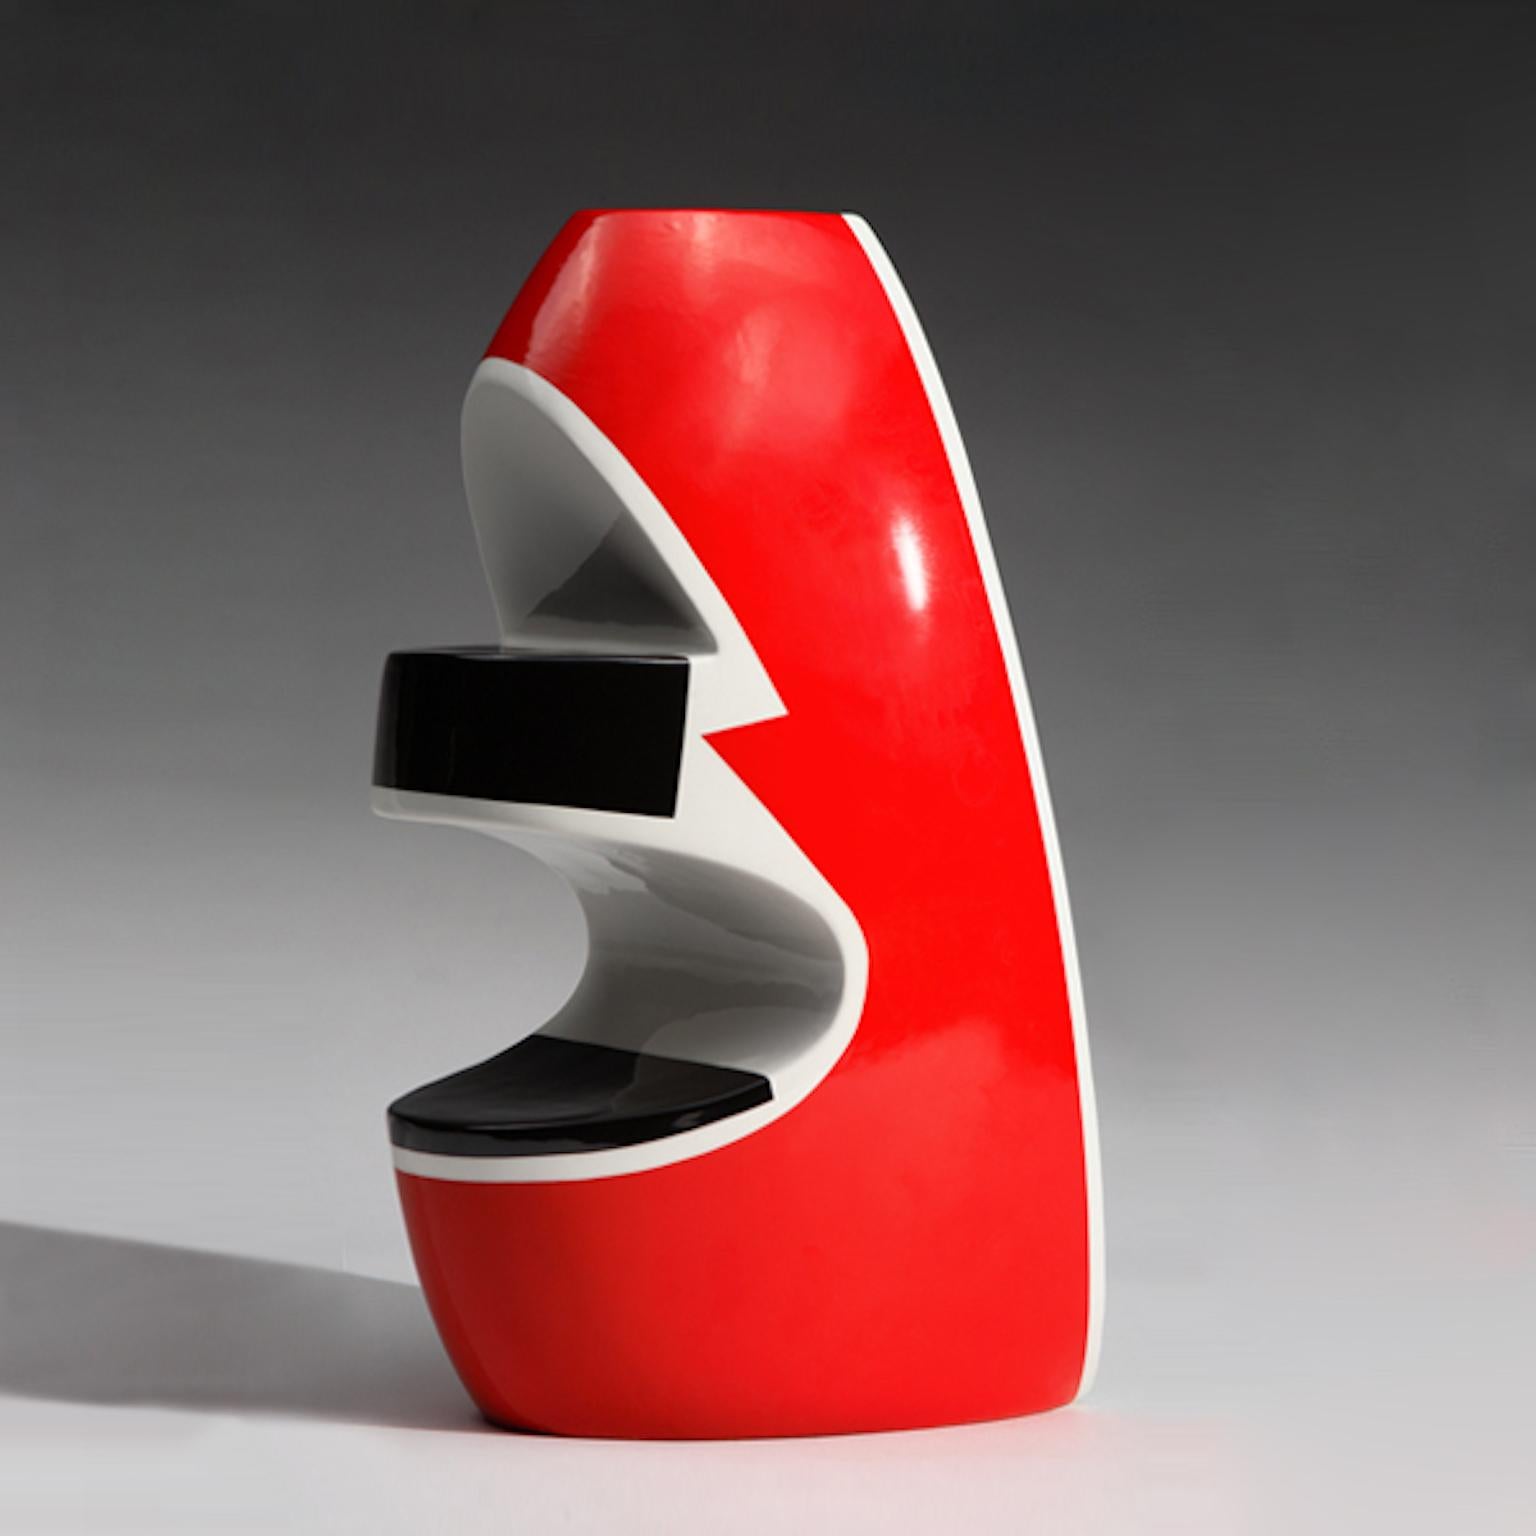 Modern Italian Ceramic Vase Red Model by George Sowden for Superego Editions. For Sale